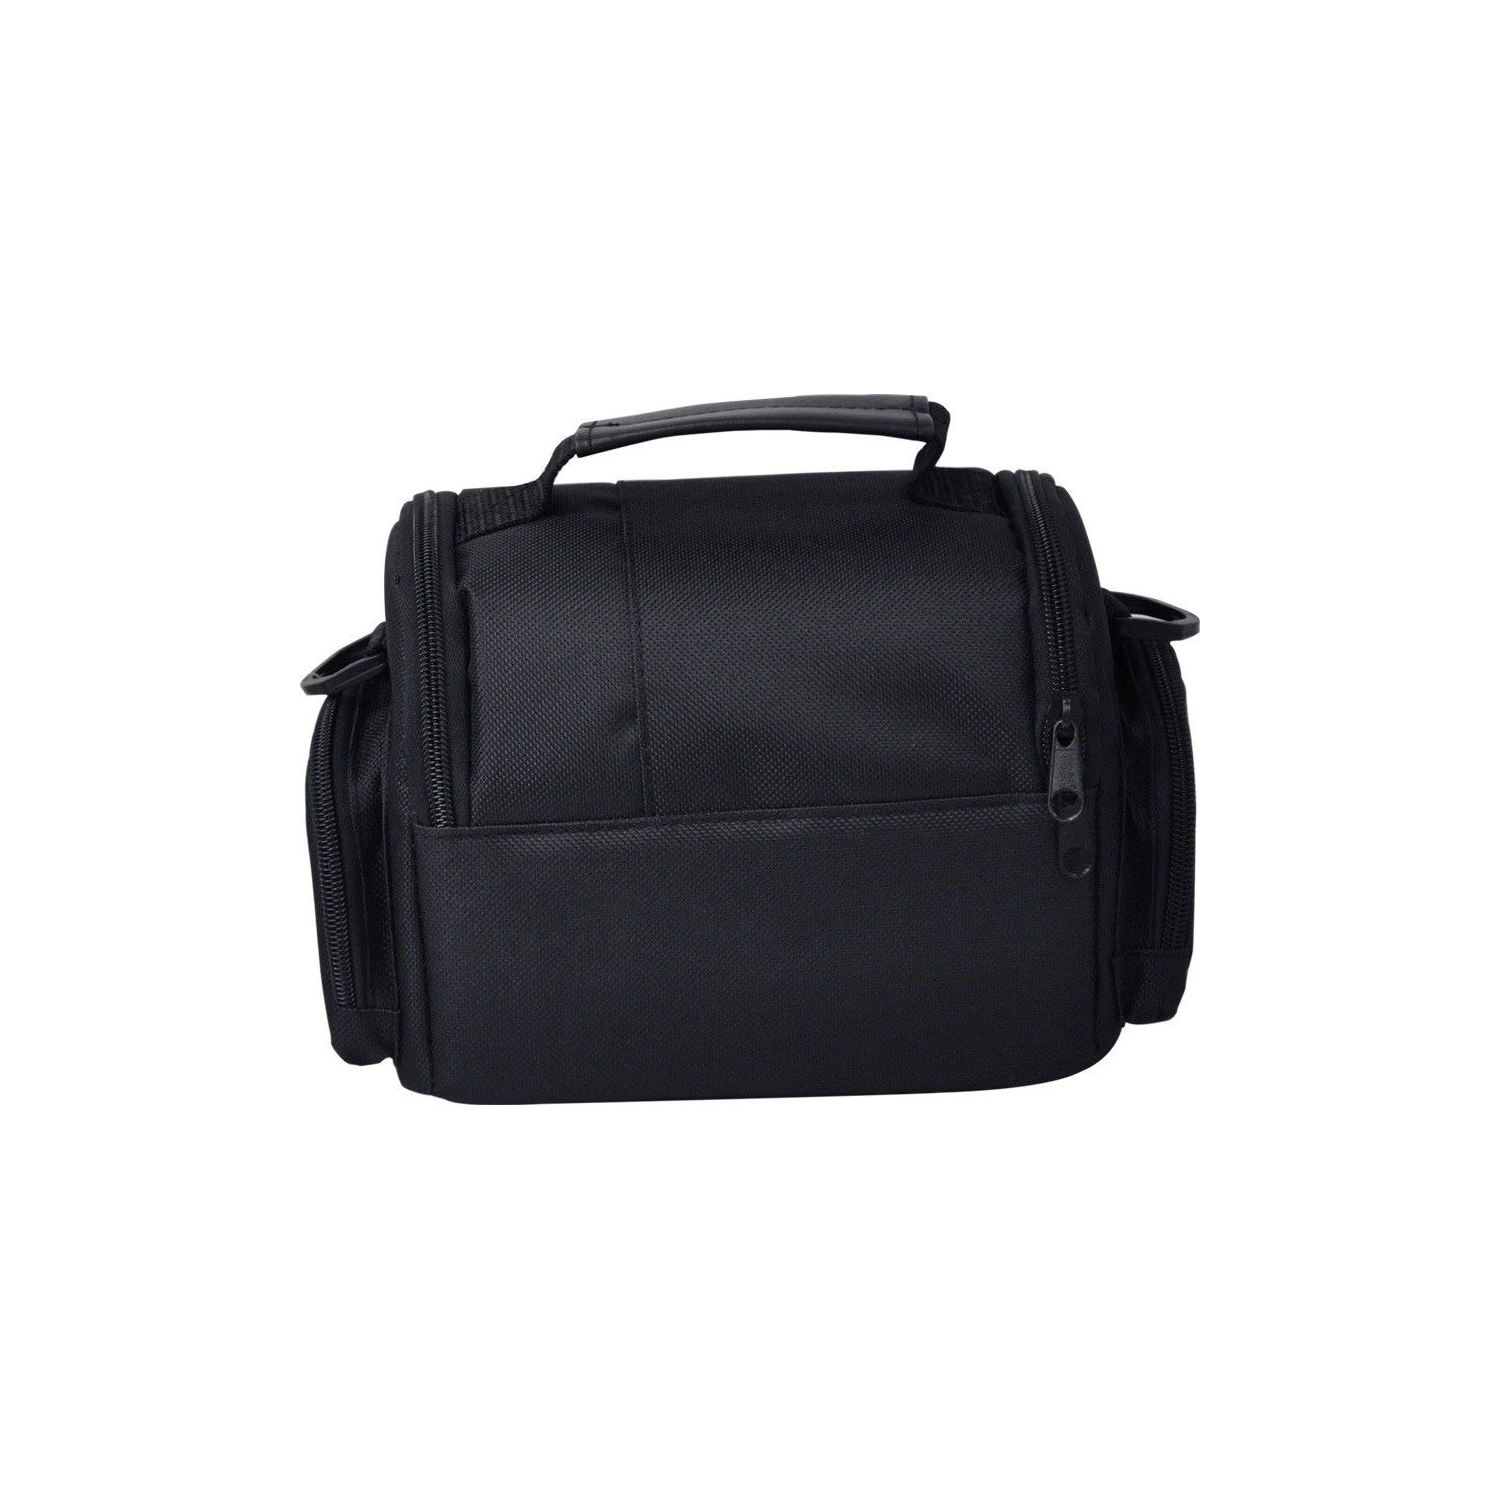 Deluxe Compact Camera Carrying Case Bag For Fujifilm Finepix S4400 S4500 SL-1000 